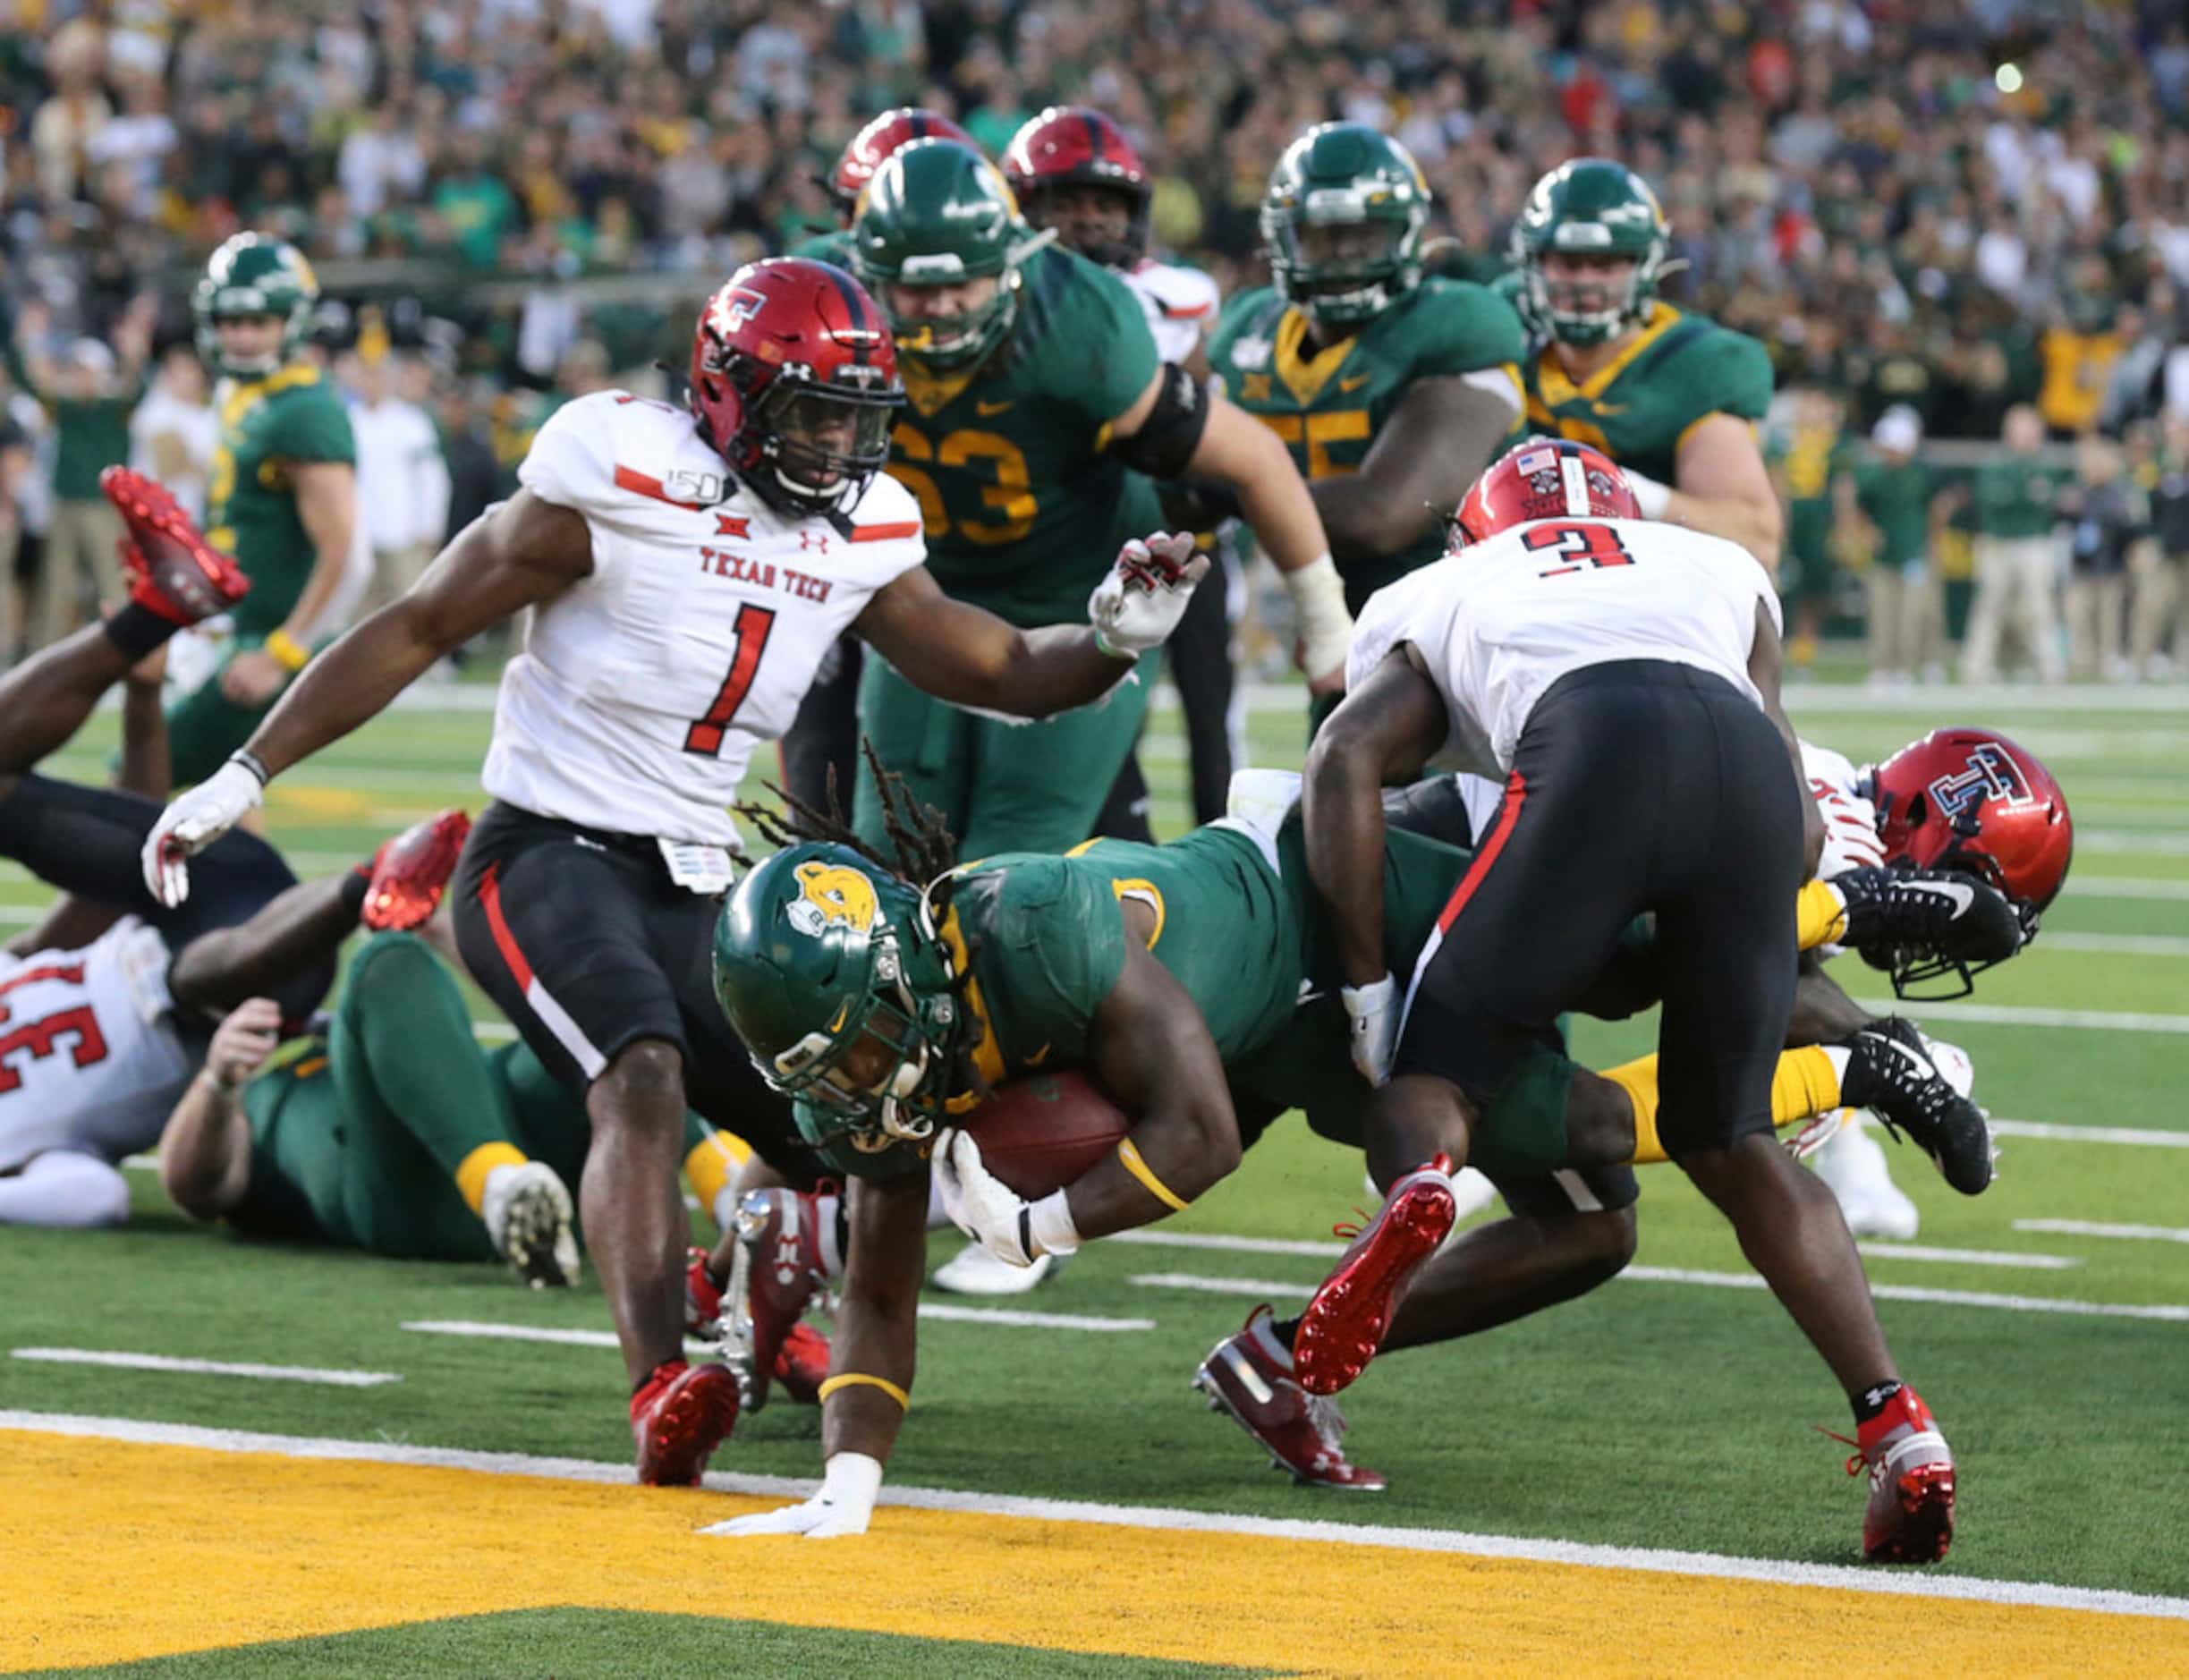 Baylor running back JaMycal Hasty, center, scores the game winning touchdown in overtime...